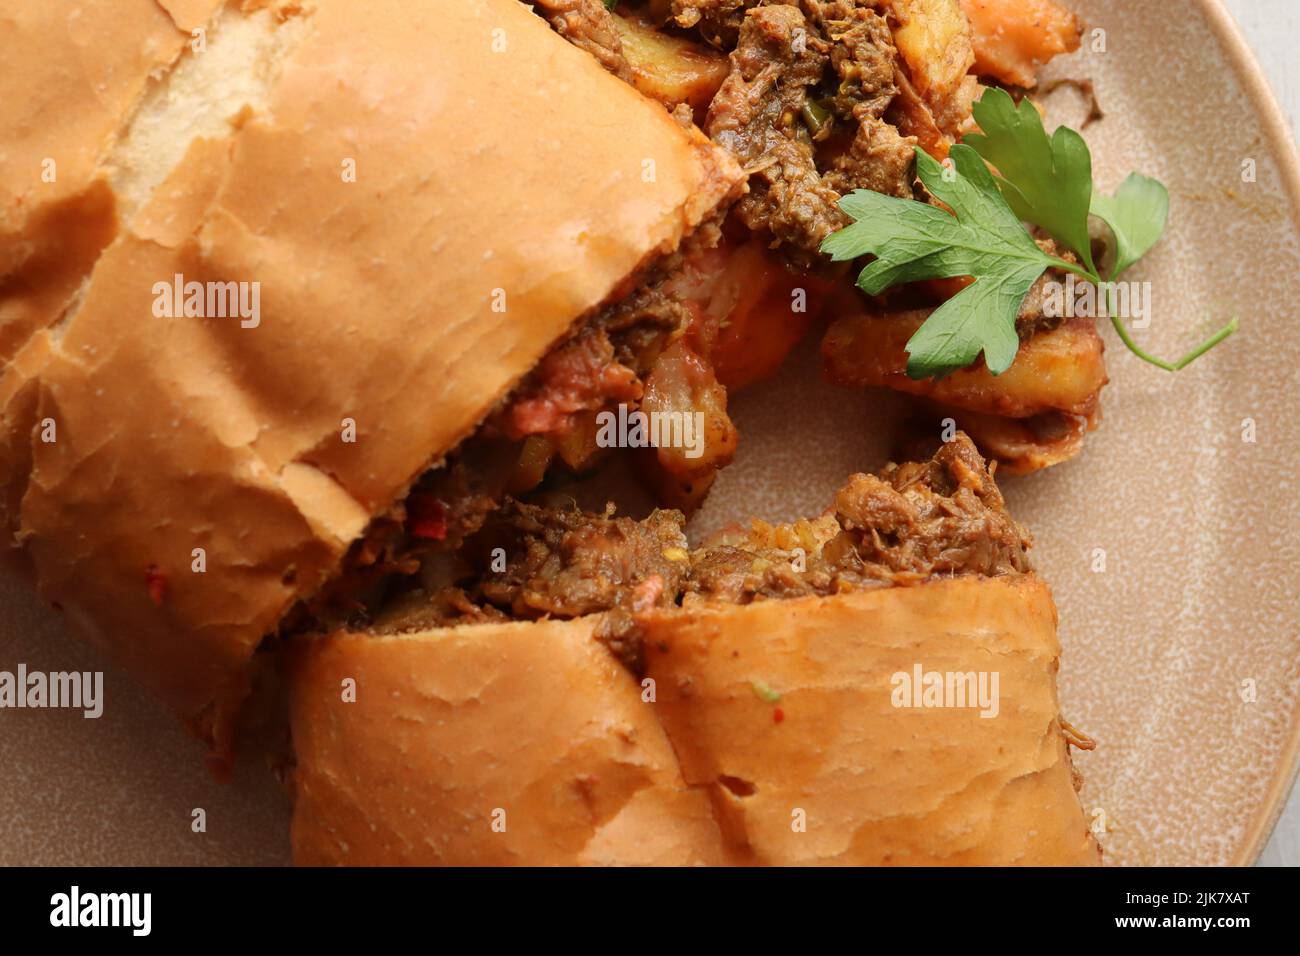 Masala steak gatsby. Bread roll filled with chips and Masala steak Stock Photo